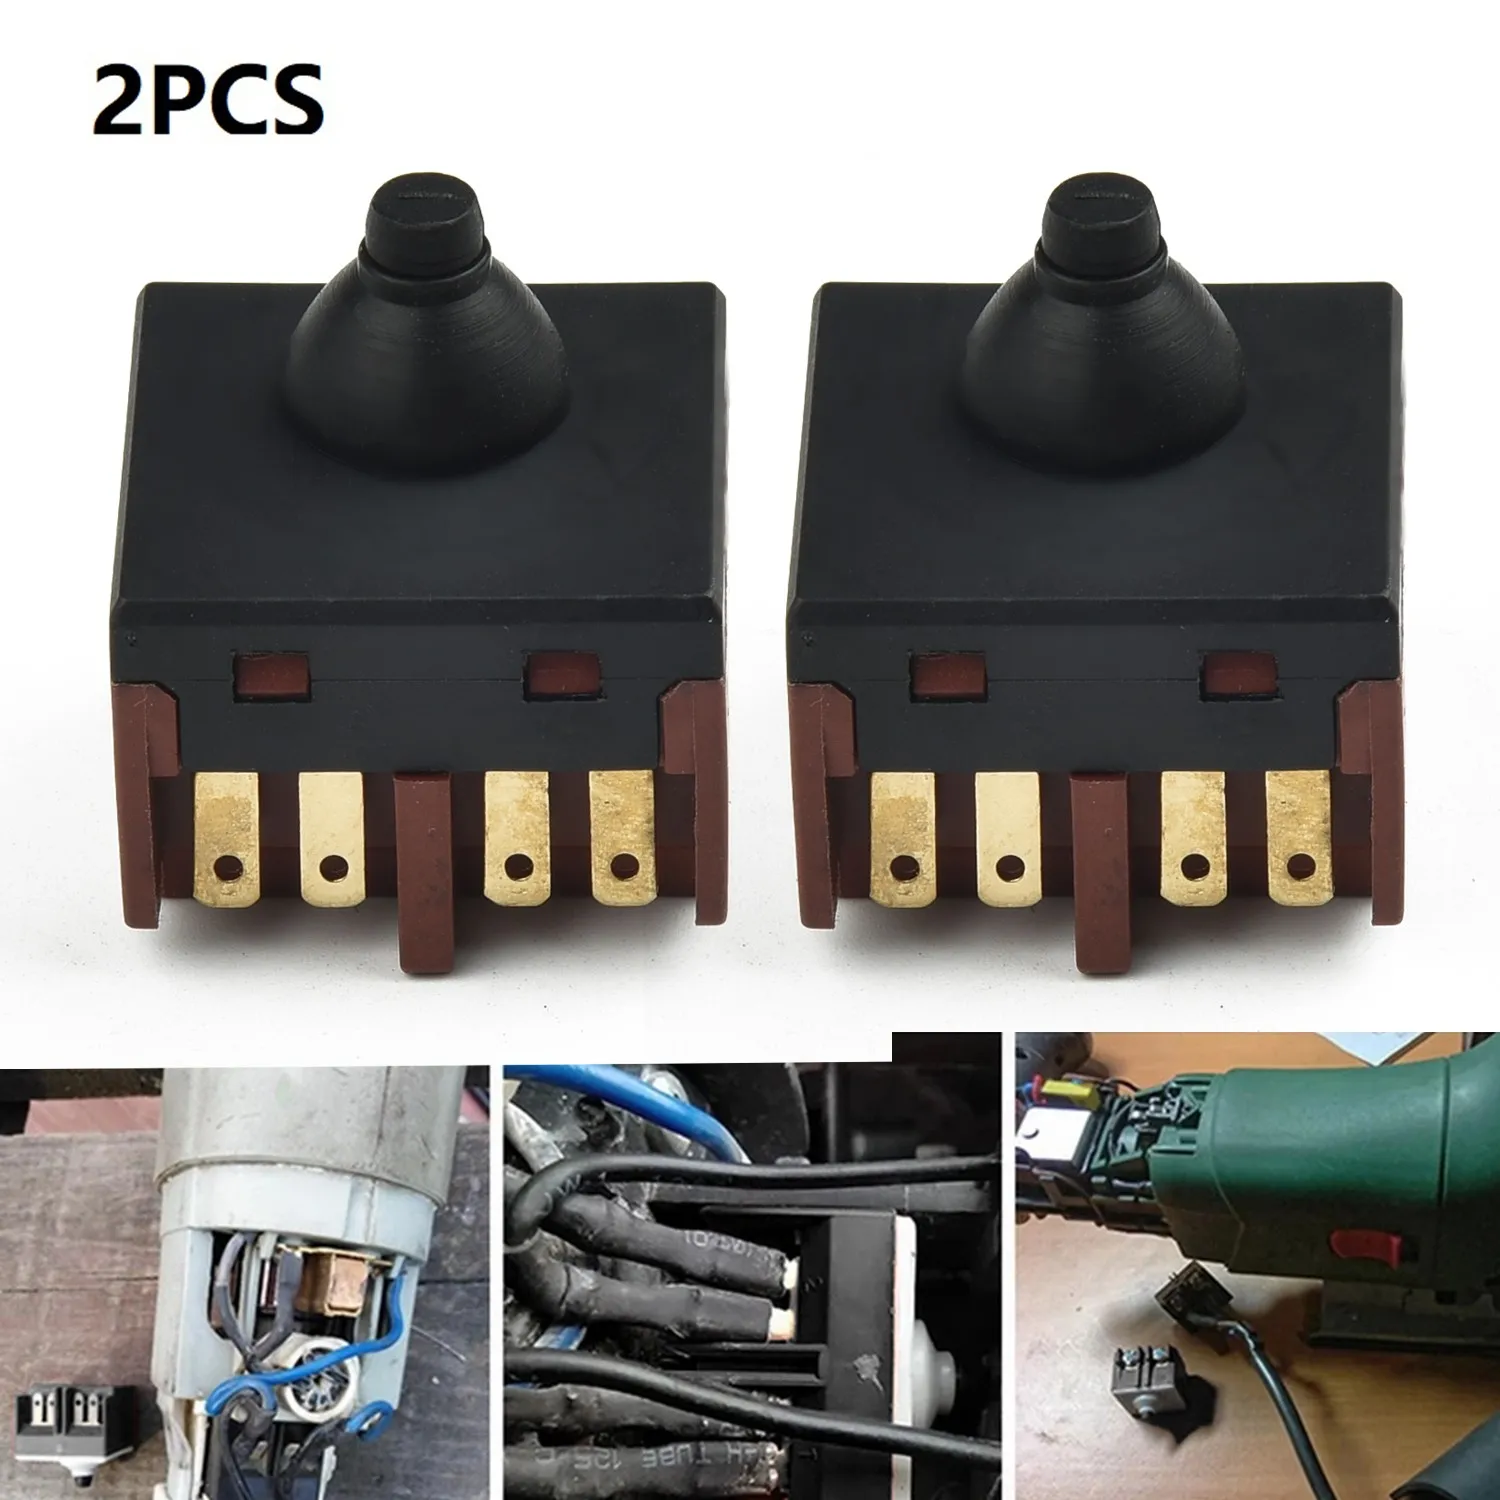 2Pcs Replacement Push Button Switch For Angle Grinder Power Tool Speed Control Switches For100mm Angle Grinder